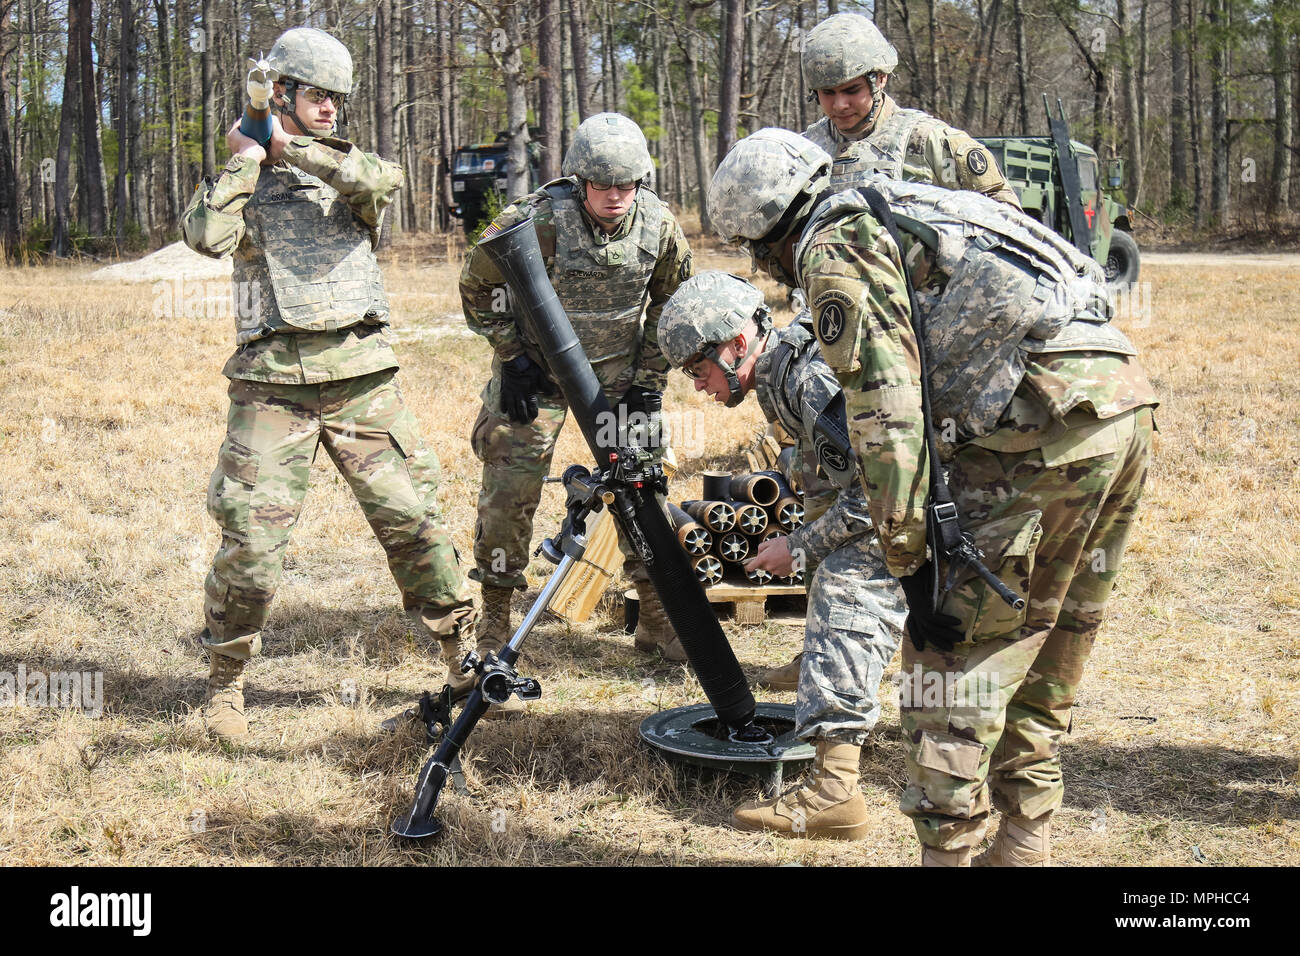 https://c8.alamy.com/comp/MPHCC4/soldiers-assigned-to-1st-battalion-3rd-us-infantry-regiment-the-old-guard-calibrates-an-m252-81mm-mortar-system-for-accuracy-during-a-live-fire-training-exercise-in-support-1st-attack-reconnaissance-battalion-82nd-combat-aviation-brigade-at-fort-ap-hill-va-march-13-us-army-photo-by-sgt-steven-galimore-MPHCC4.jpg